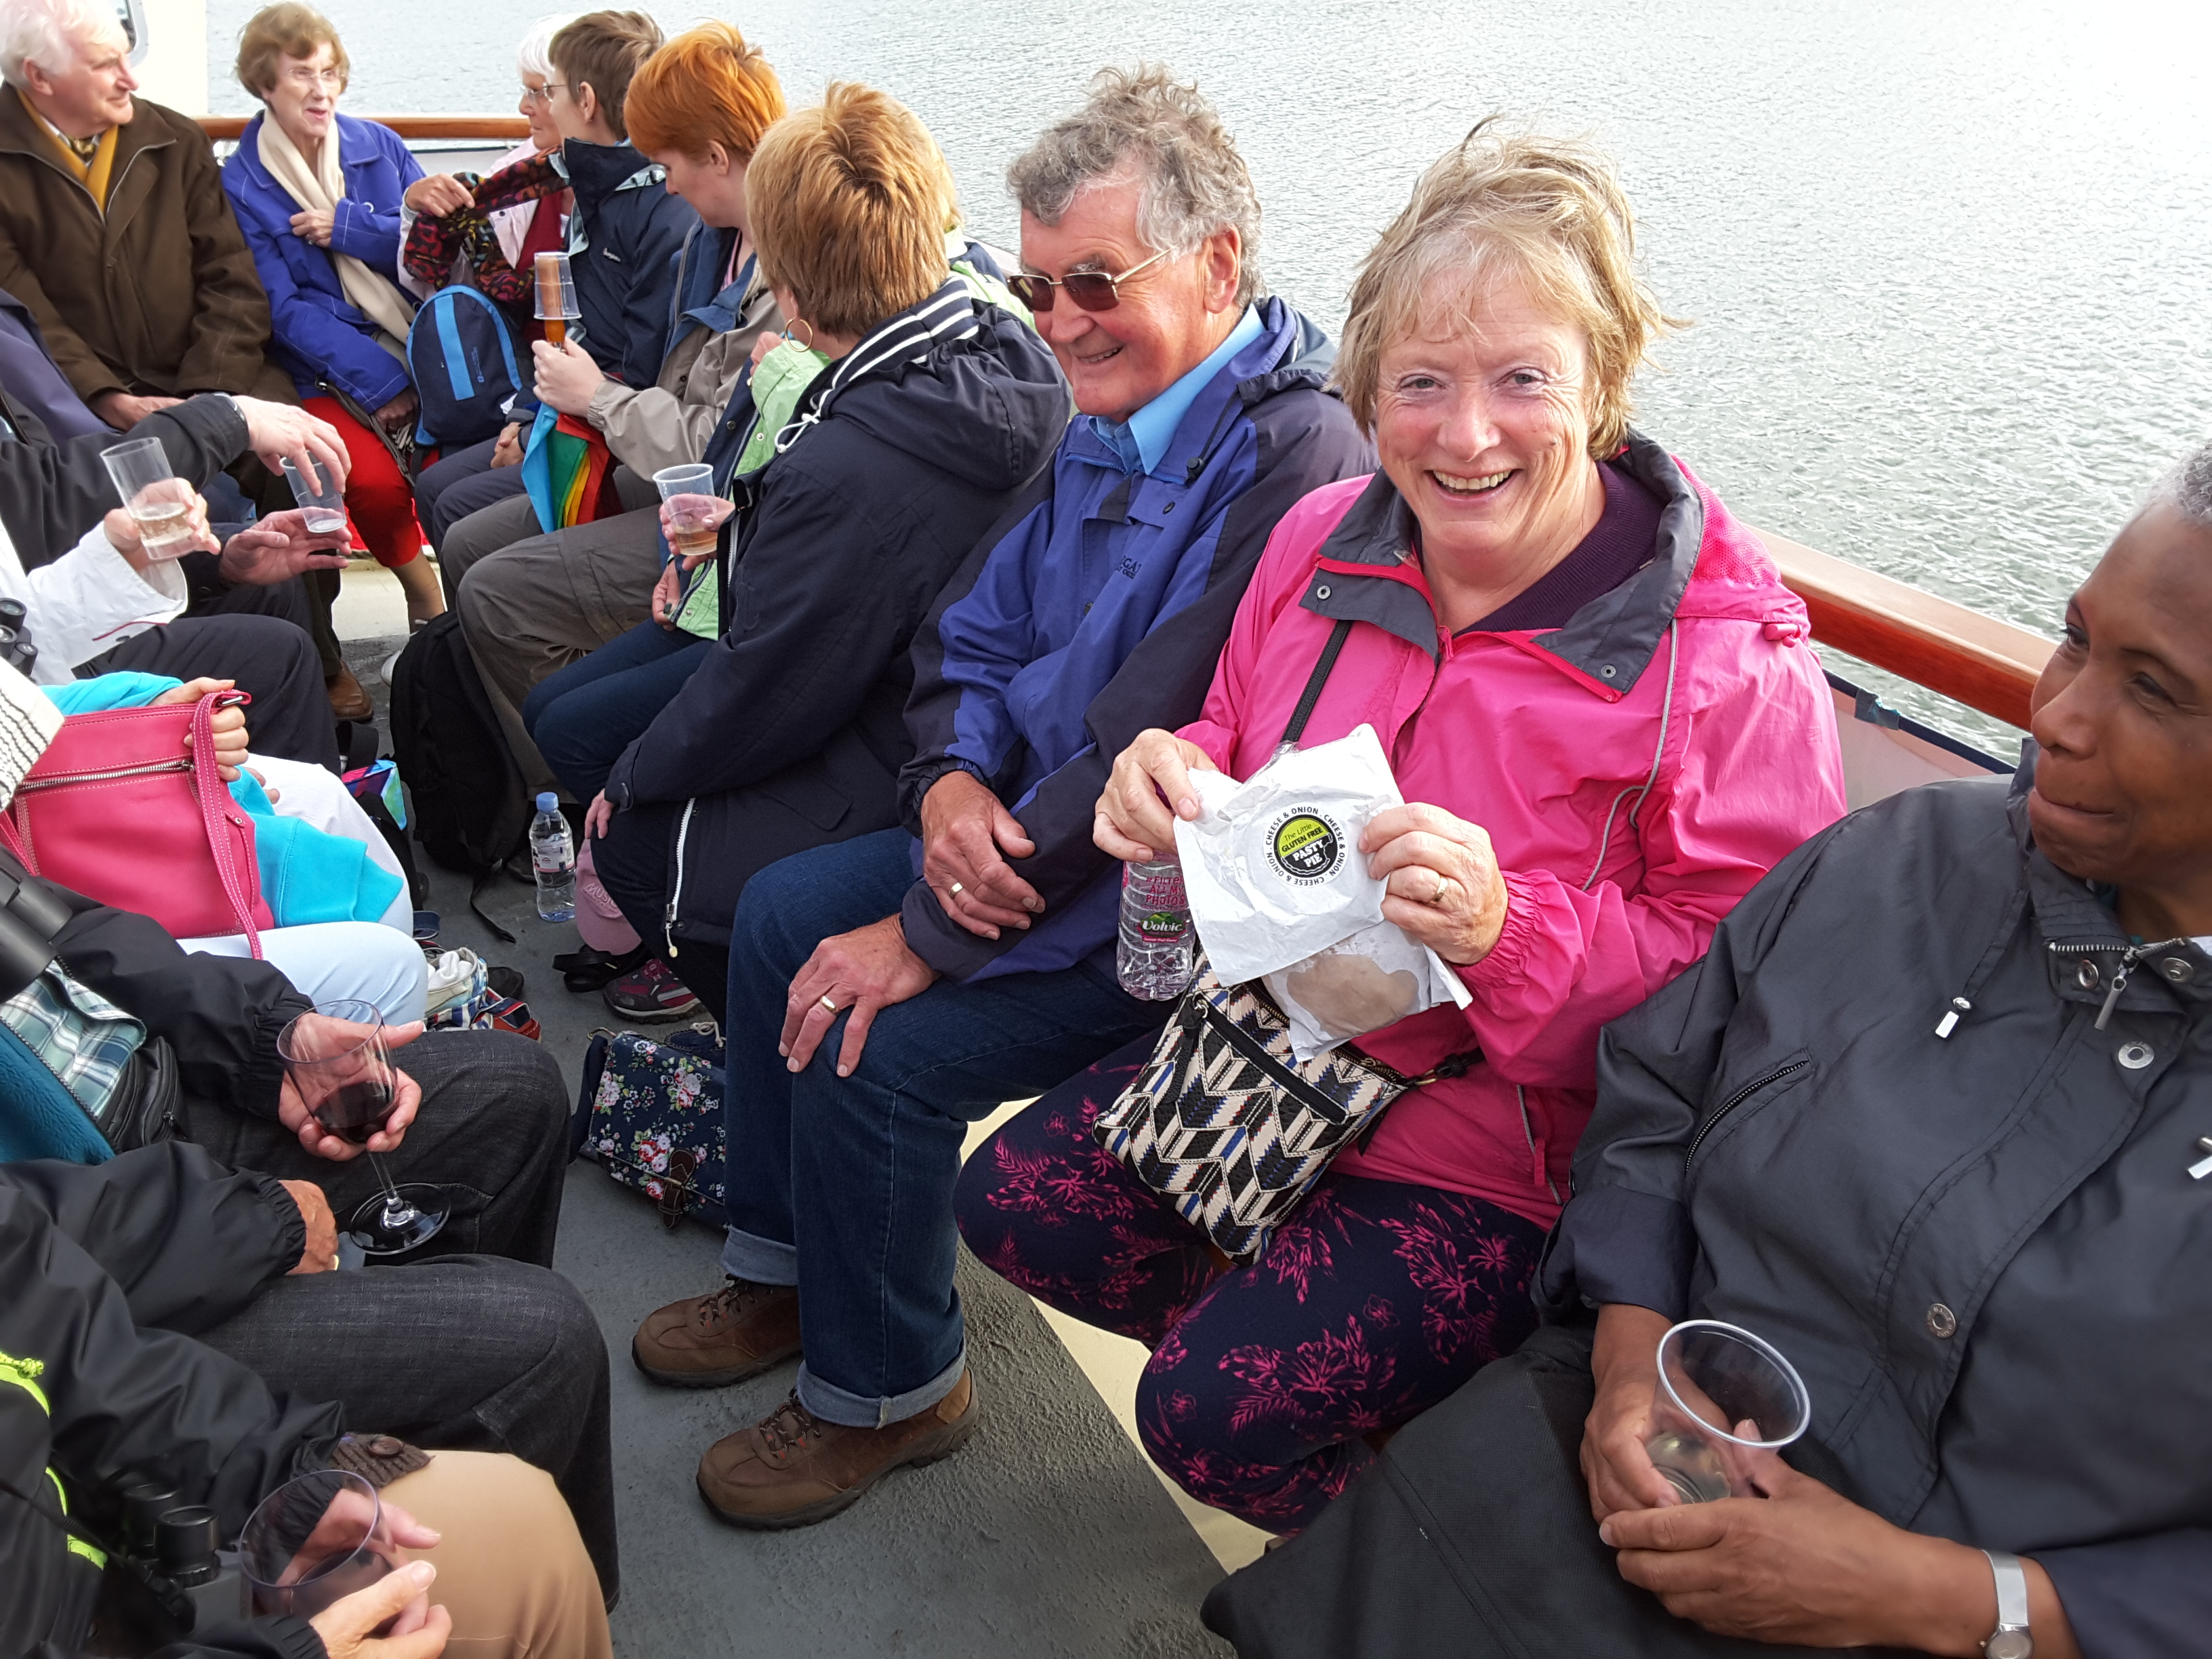 Friends enjoying catching up on the River Fal.